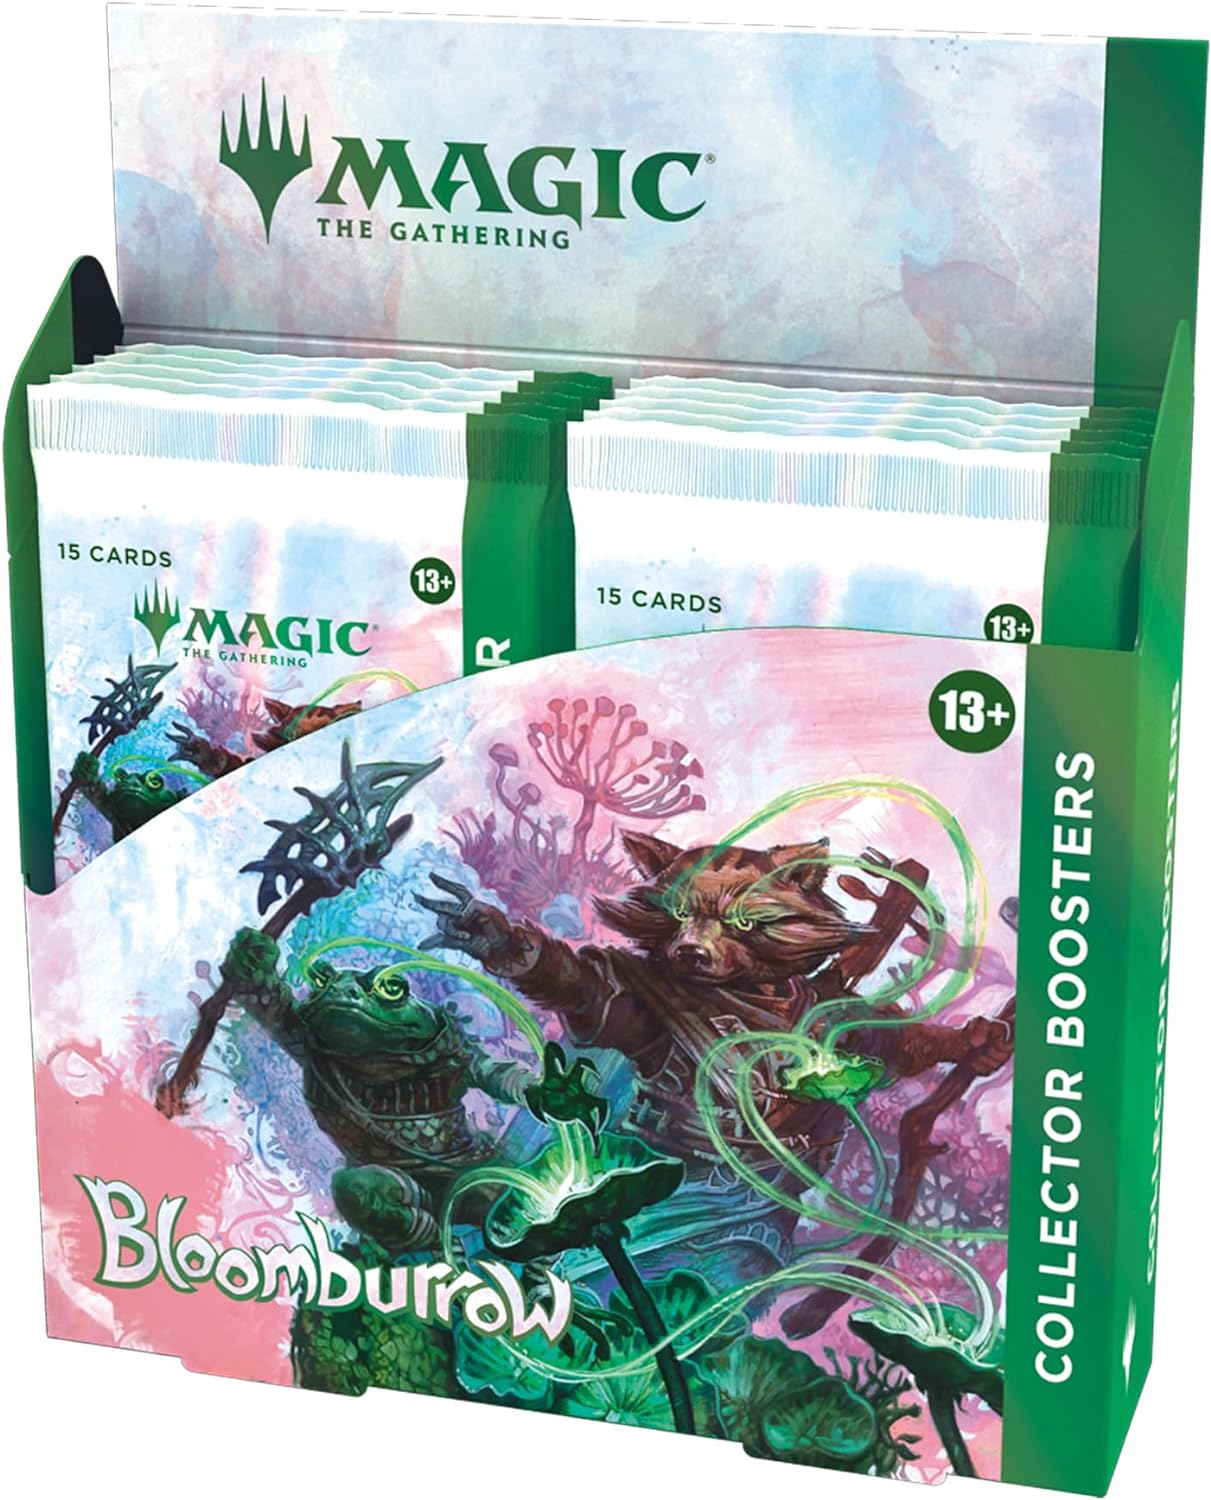 Magic The Gathering Bloomburrow Collector Booster Box _ 12 Packs _180 Magic Cards_